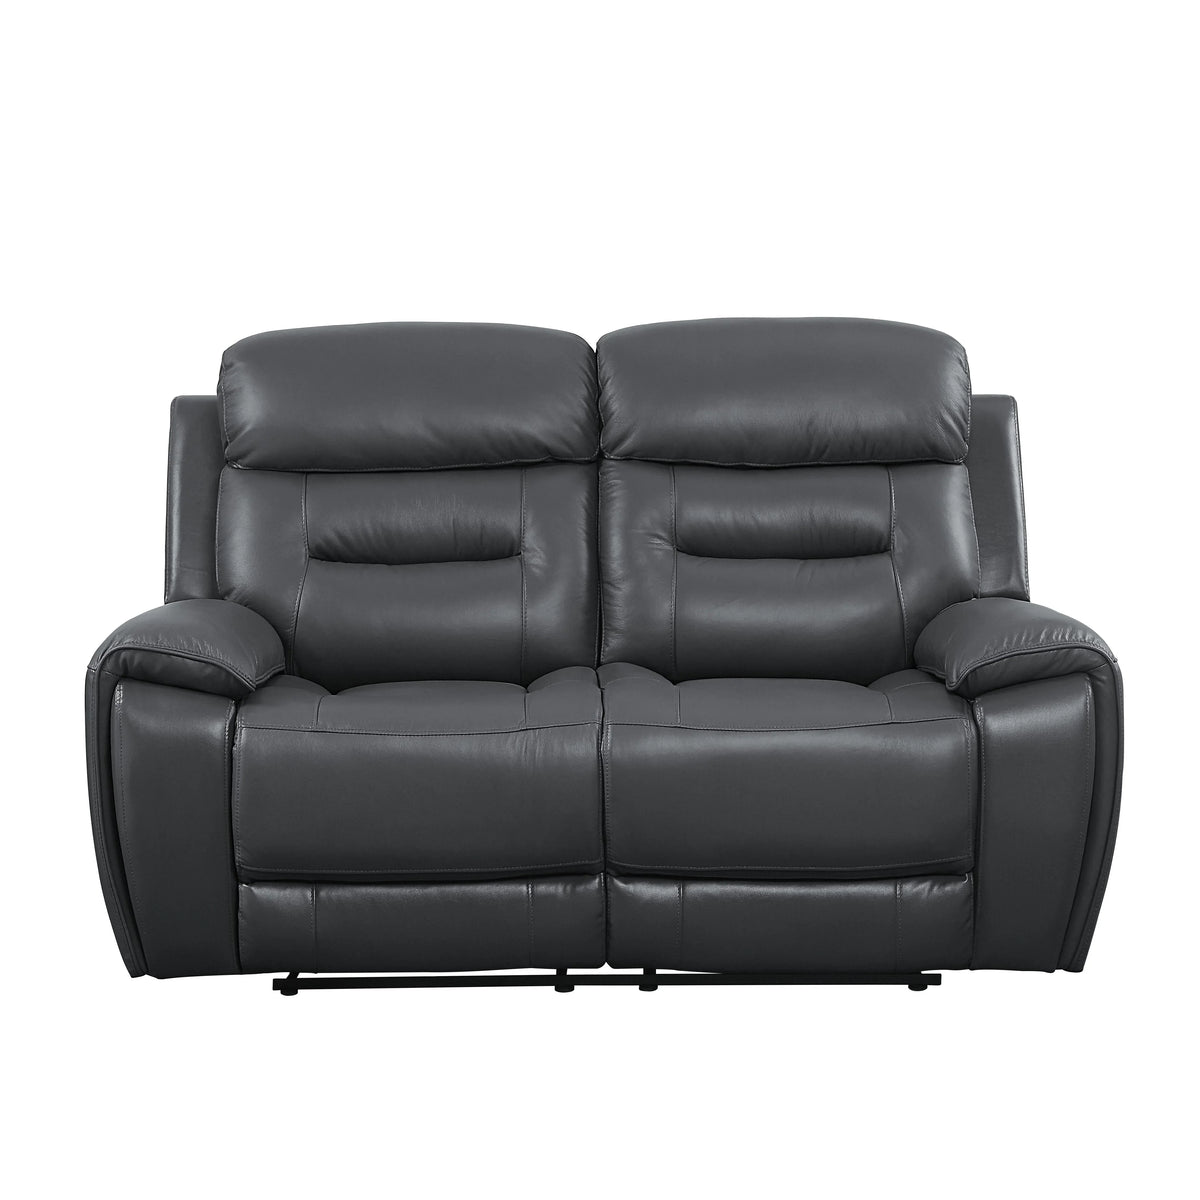 Lamruil Gray Top Grain Leather Loveseat Model LV00073 By ACME Furniture